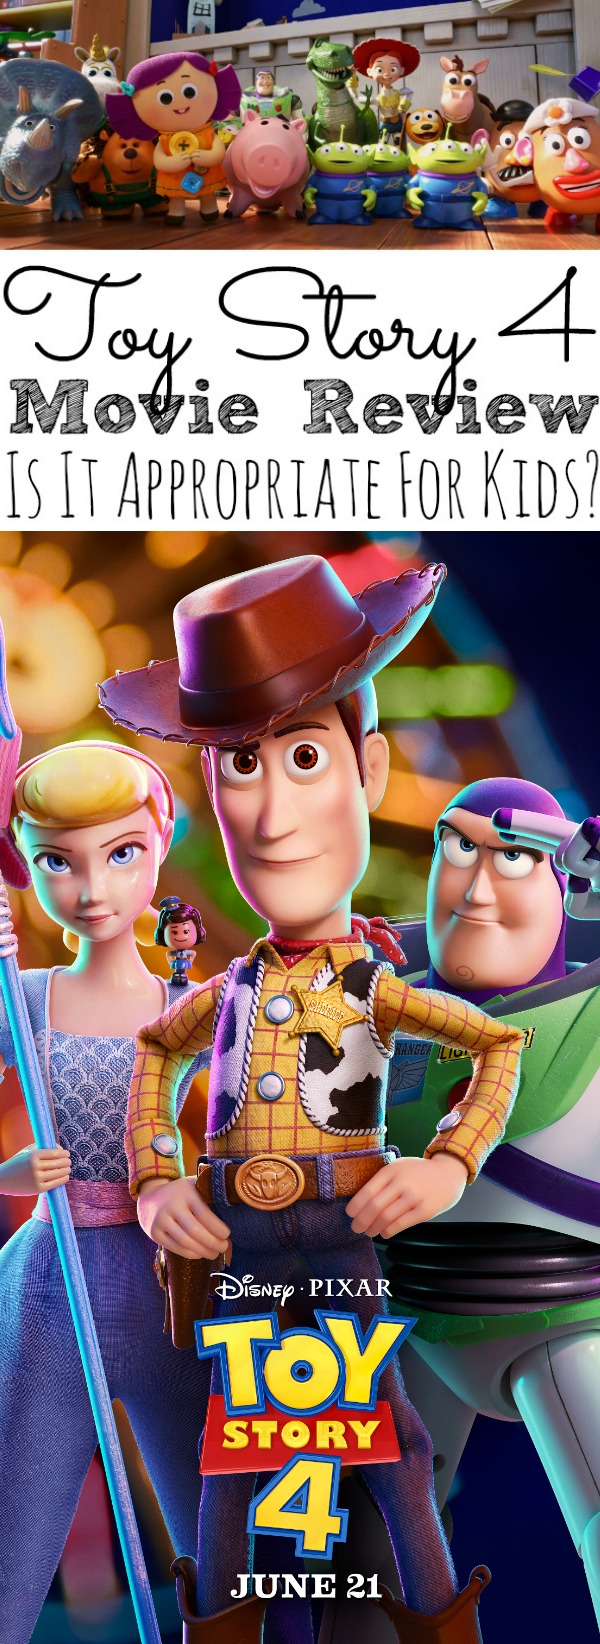 Movie review: 'Toy Story 4